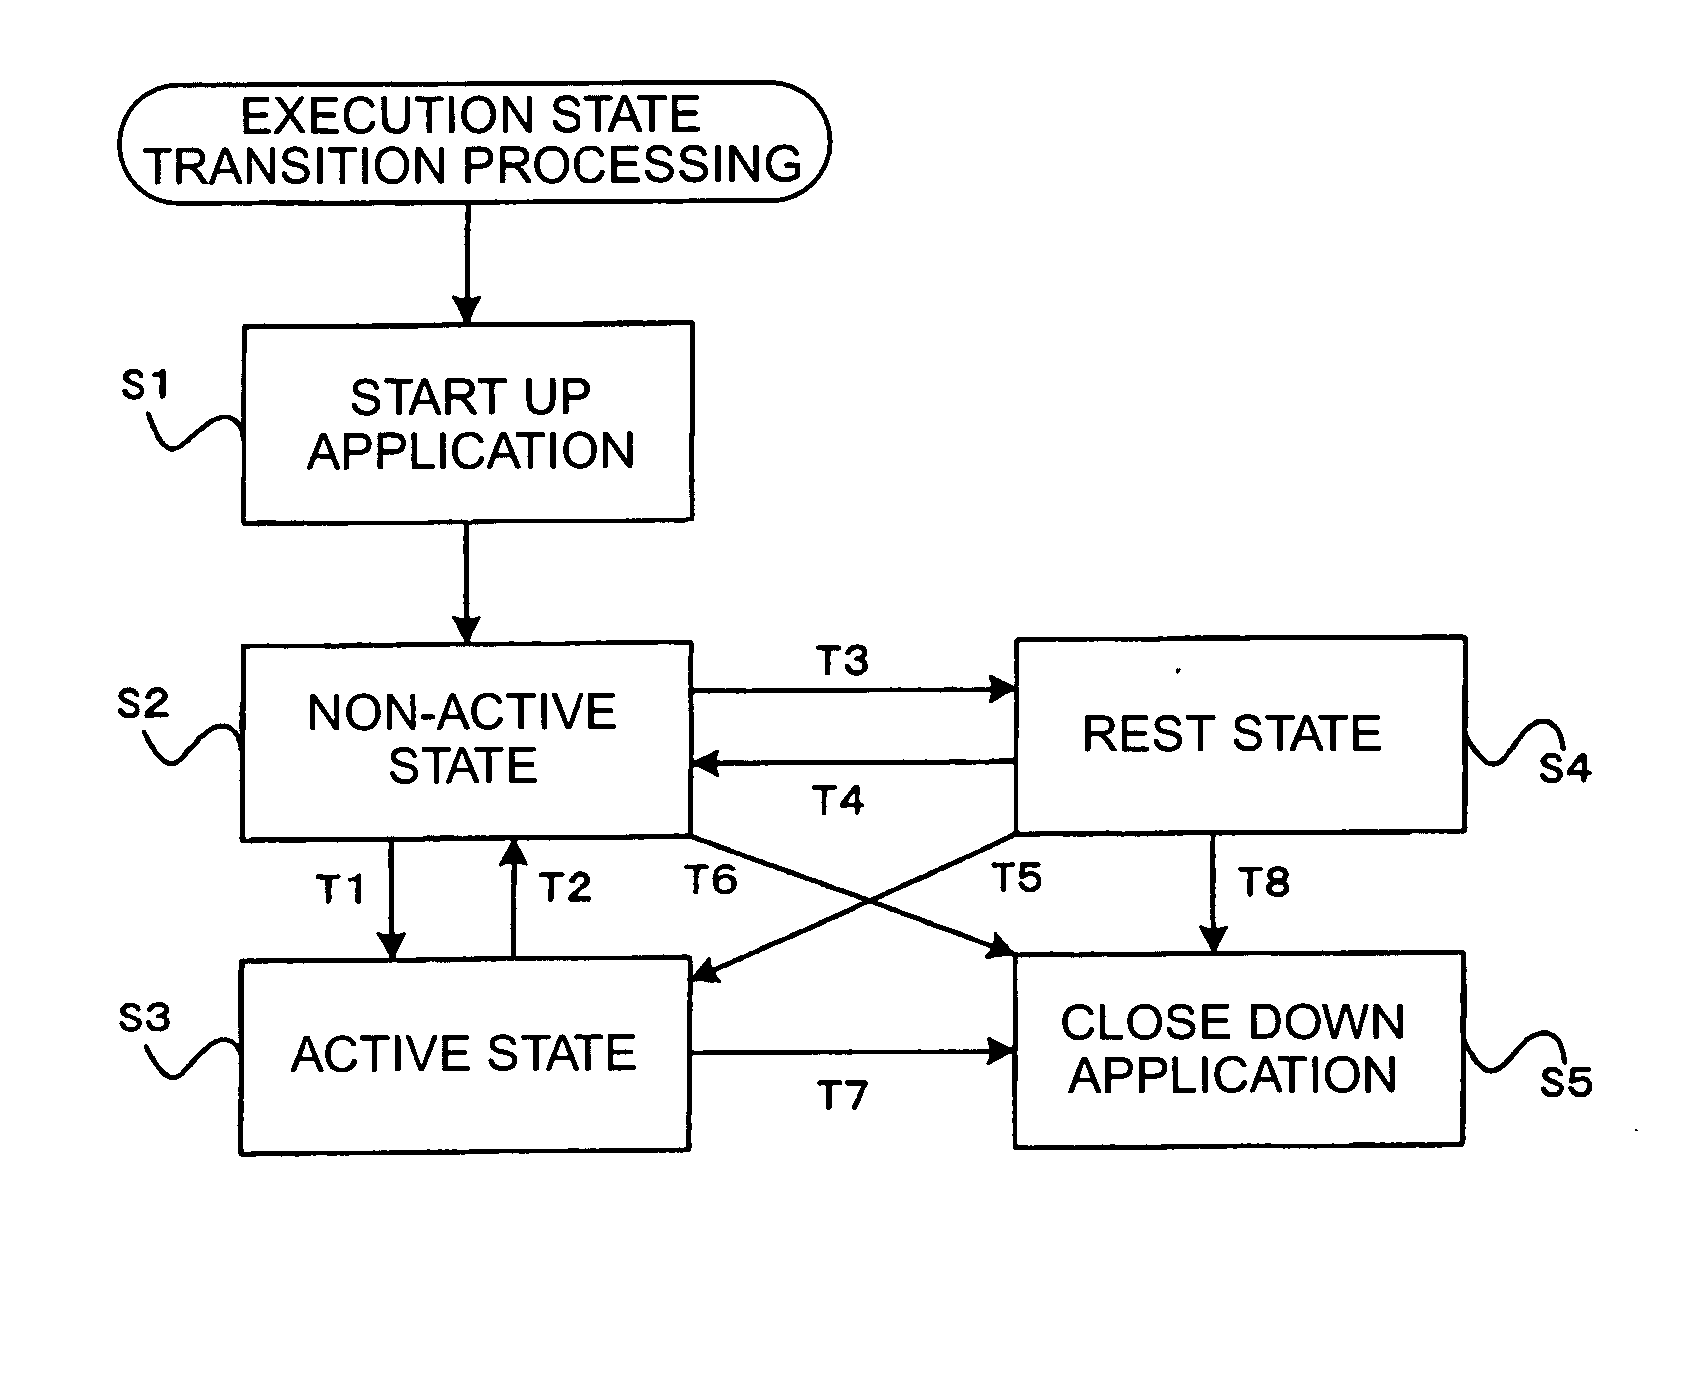 Mobile communication terminal, method for controlling execution state of application program, application program, and recording medium wherein application program has been recorded